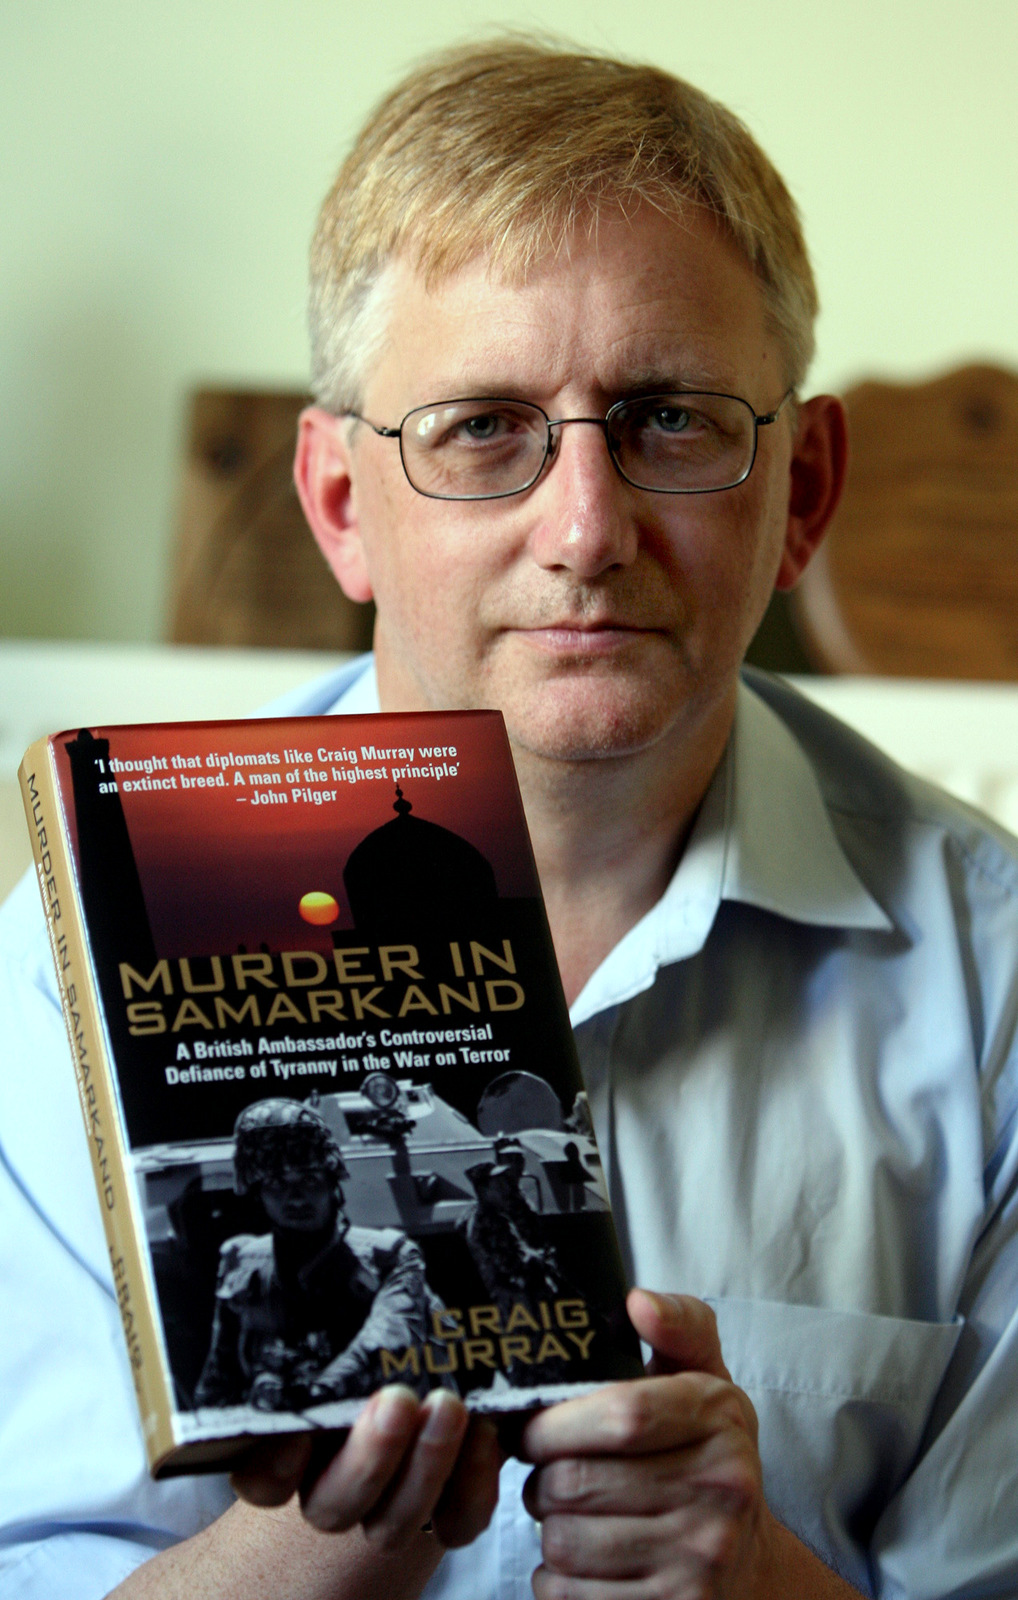 Former British Ambassador Craig Murray with his book, Murder in Samarkand. Murray was the British ambassador to Uzbekistan until he was removed from his post in October 2004 for exposing human-rights abuses by the US backed regime of President Islam Karimov. (AP/Simon Dawson)